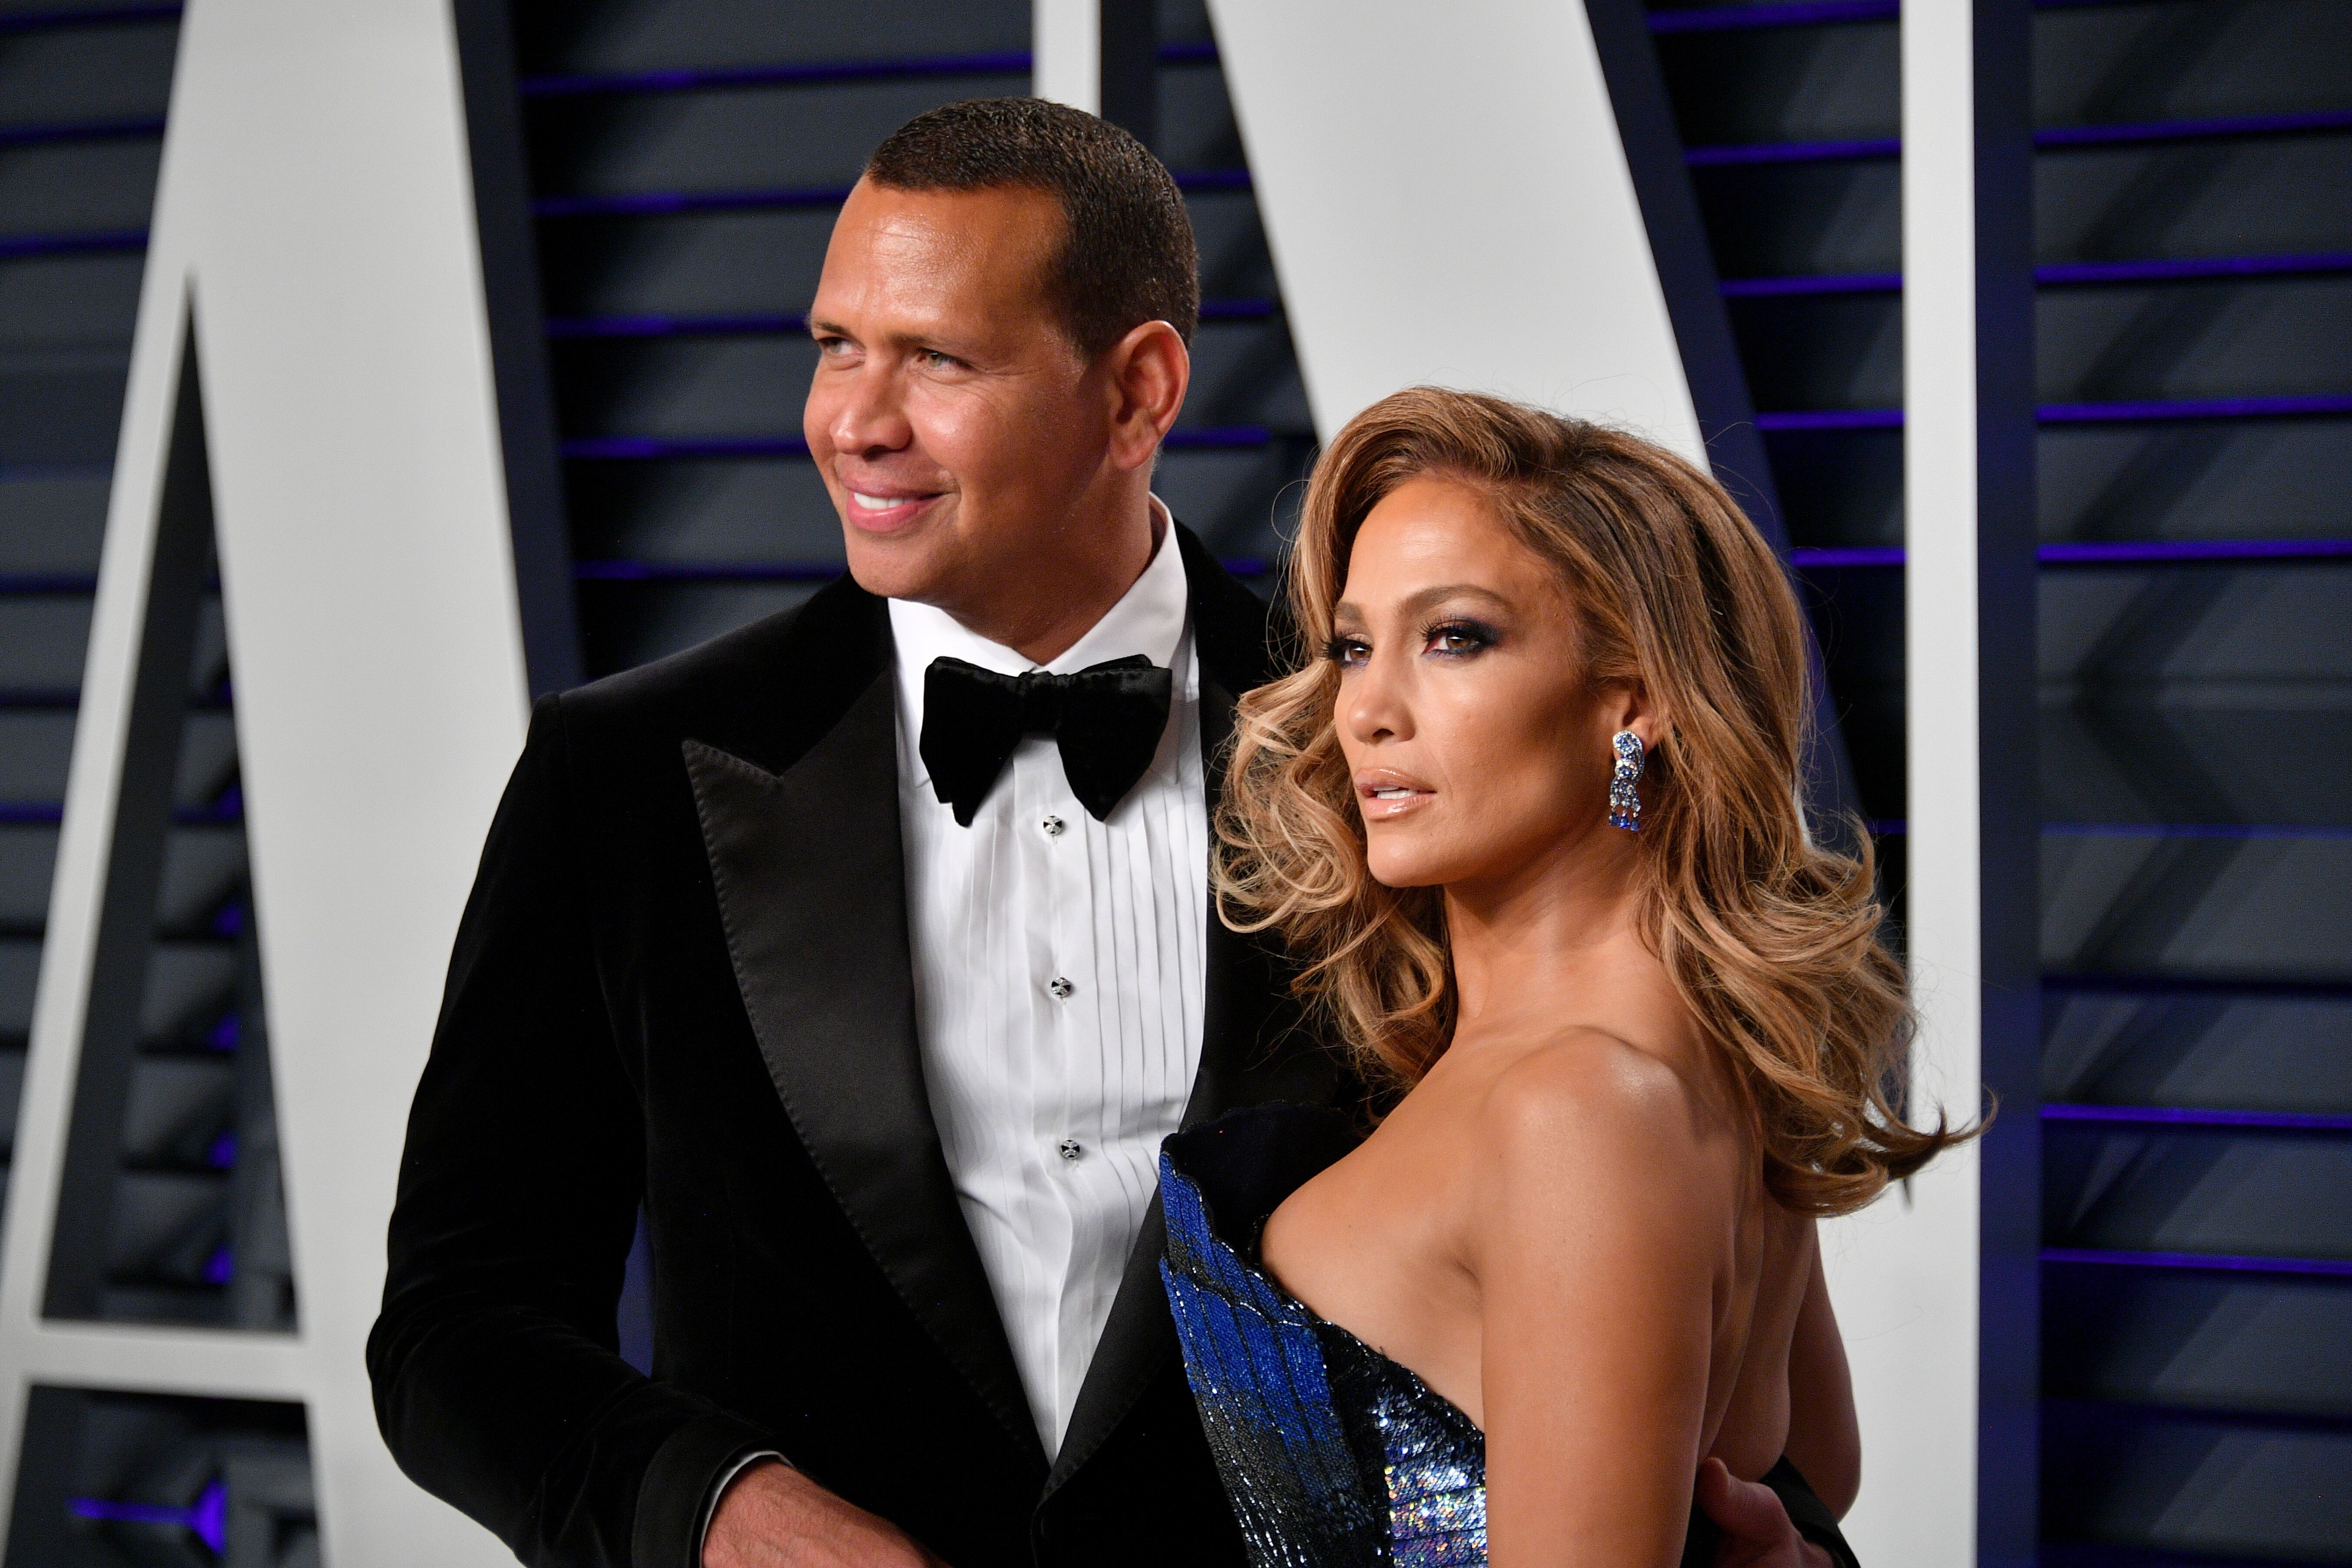 Alex Rodriguez and Jennifer Lopez attend the 2019 Vanity Fair Oscar Party hosted by Radhika Jones at Wallis Annenberg Center for the Performing Arts on February 24, 2019 | Photo: Getty Images